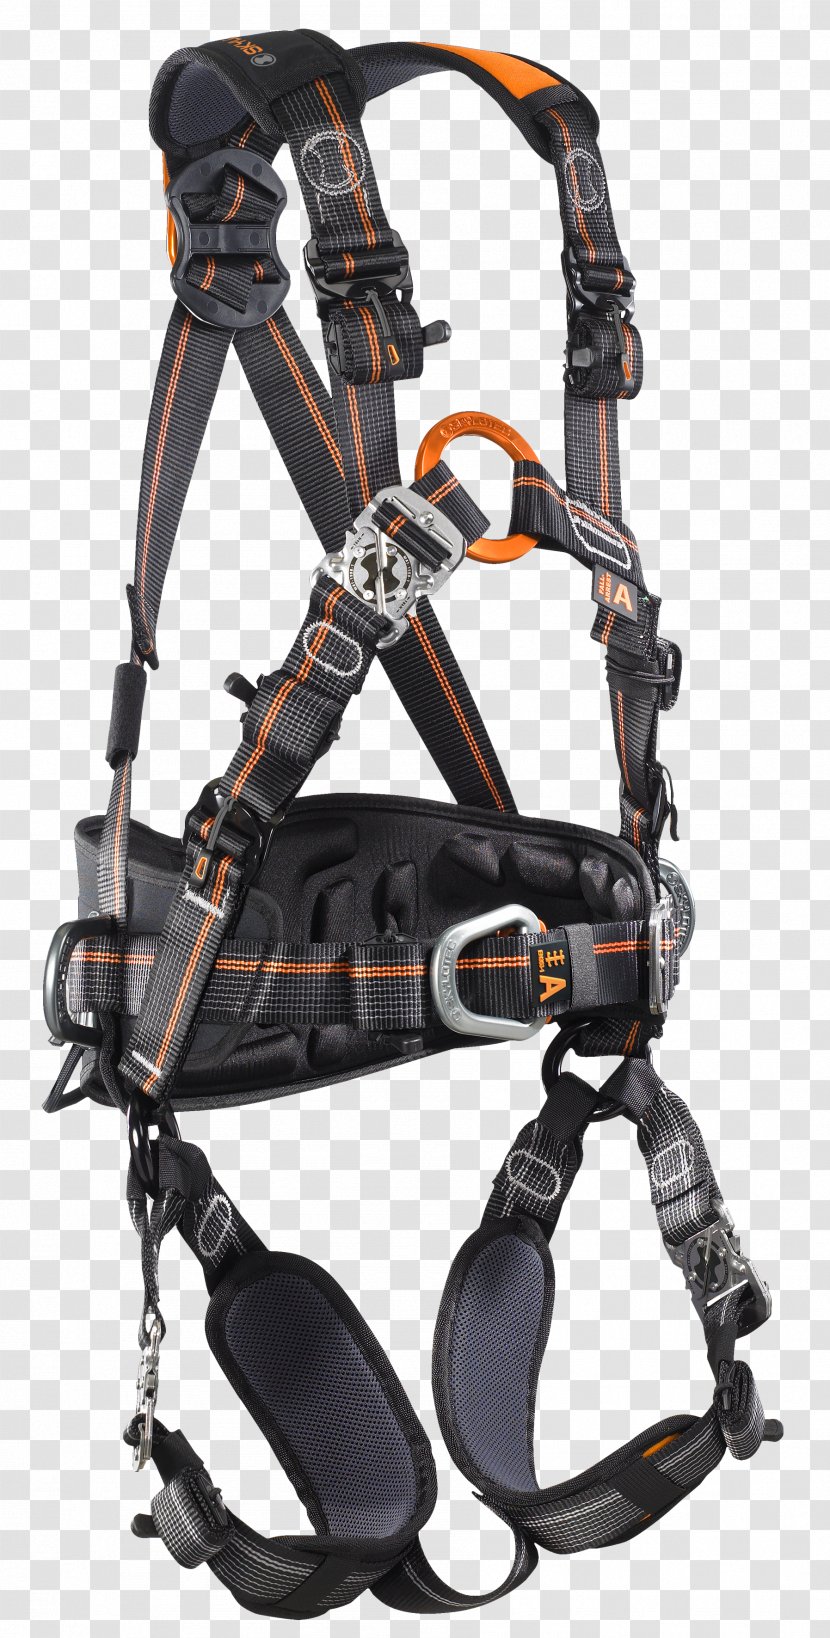 Climbing Harnesses SKYLOTEC Safety Harness Personal Protective Equipment - Security - Skylotec Transparent PNG